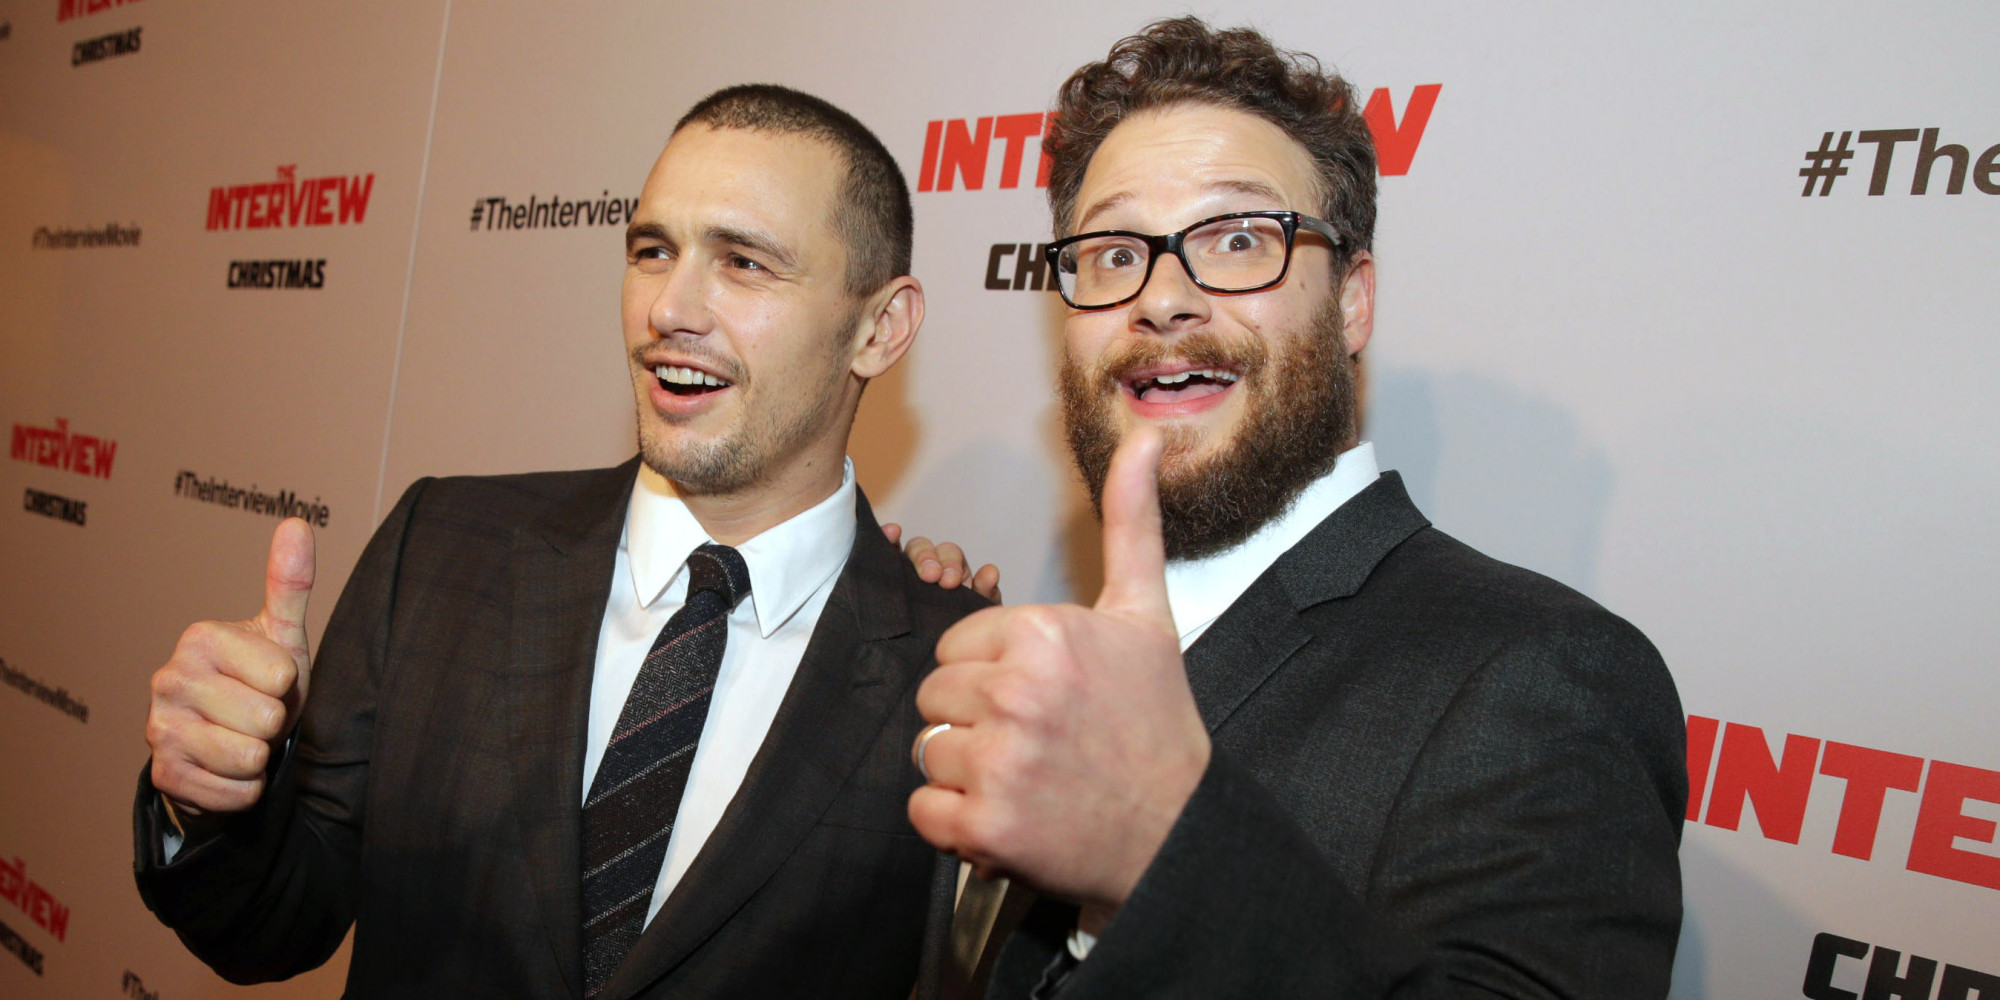 'The Interview' Gets VOD Release Via YouTube, Google Play | HuffPost